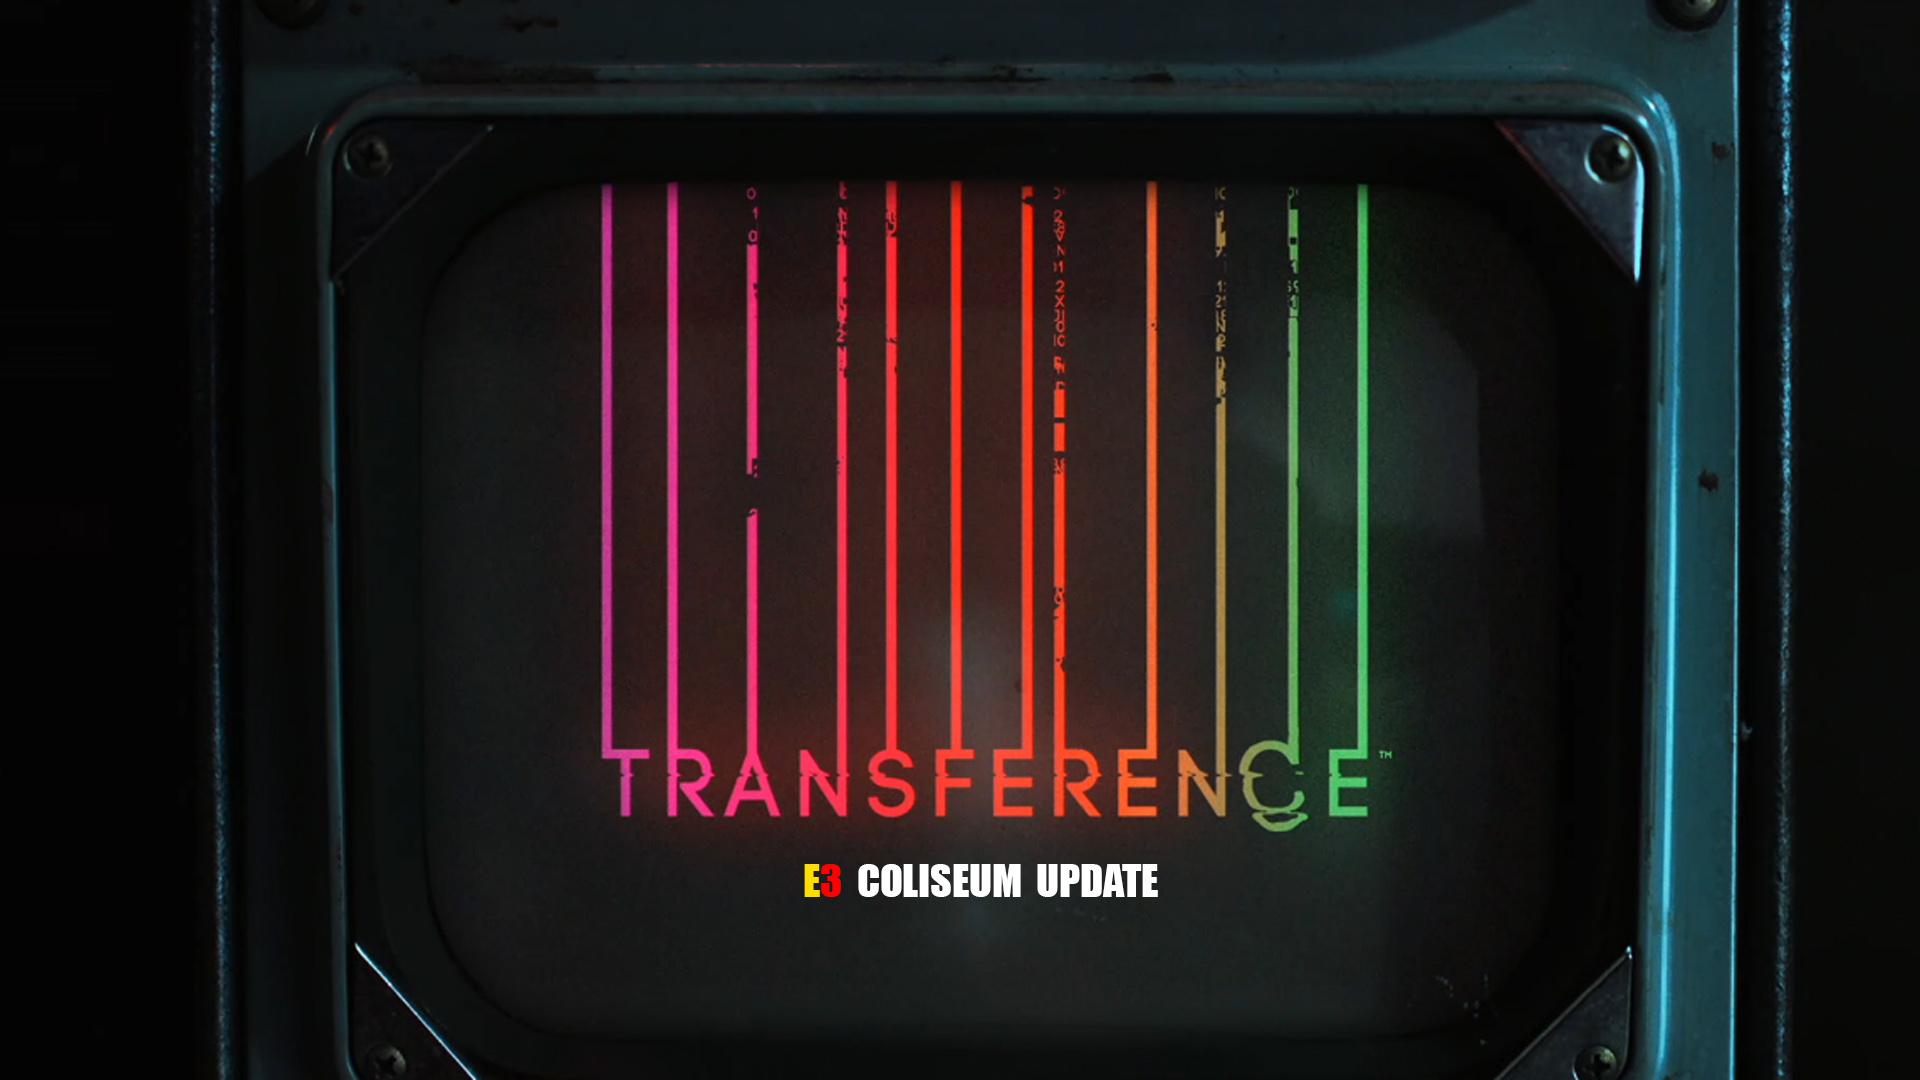 Ubisoft Provides More Information About Transference During E3